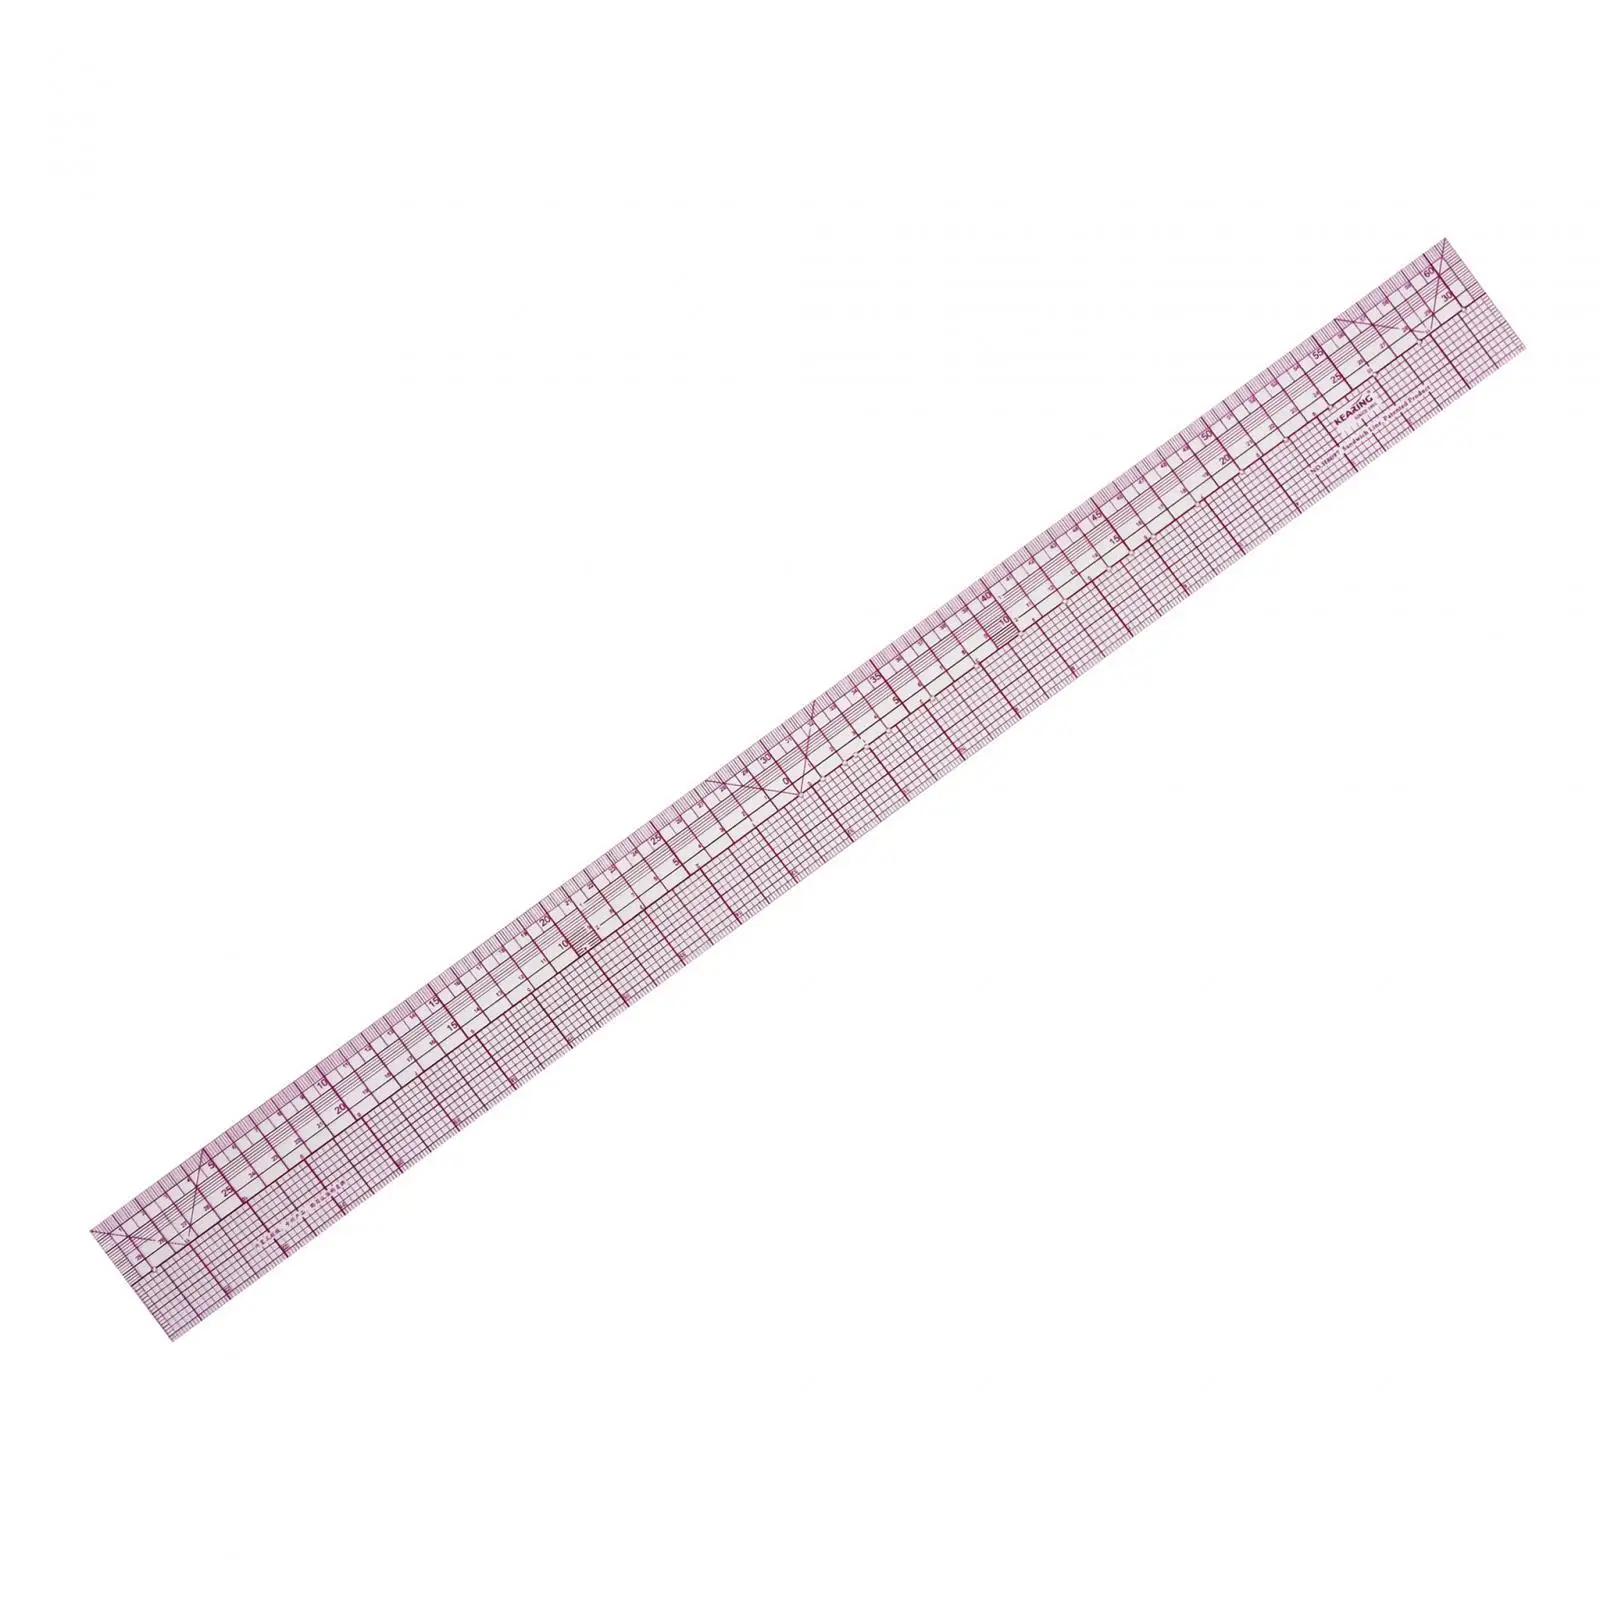 Patchwork Ruler 24inch Durable Multifunctional Grading Rulers Fabric Ruler for Tailor Crafts Making Sewing Accessories Measuring